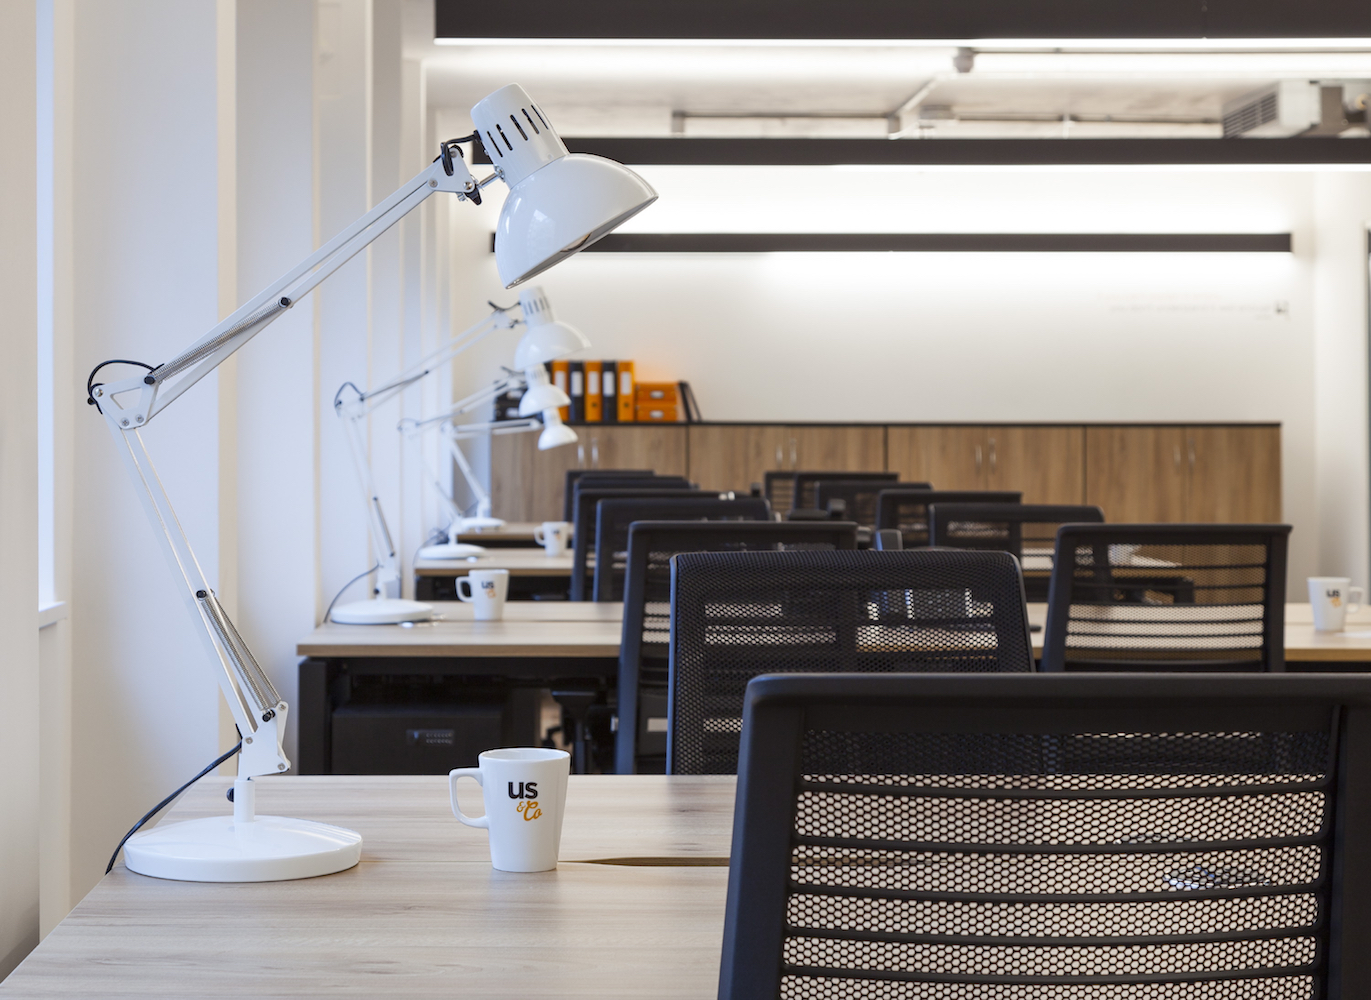 Us&Co's private co-working space with office furniture, office chairs, dedicated desks, cabinets & desk lamps.